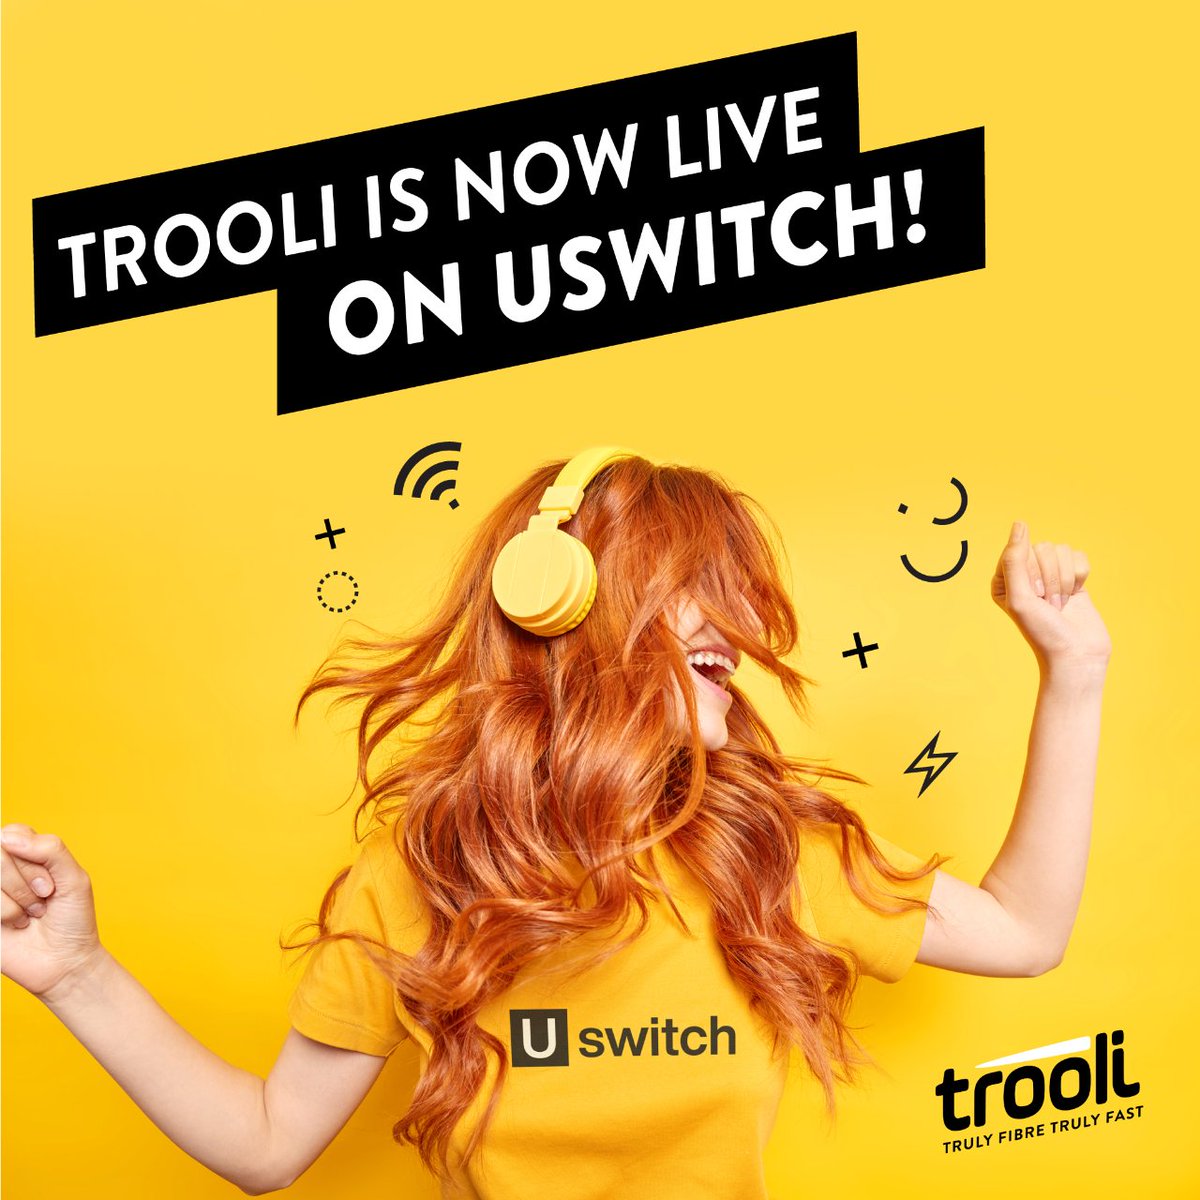 Exciting News! 🎉 Trooli is now on @UswitchUK 🌐💡
Experience the future of connectivity with us. Check out our Uswitch profile and see how we're redefining online experiences! 💫

Explore here: uswitch.com/broadband/prov…

#FibreOptic #BroadbandSolutions #InternetProvider